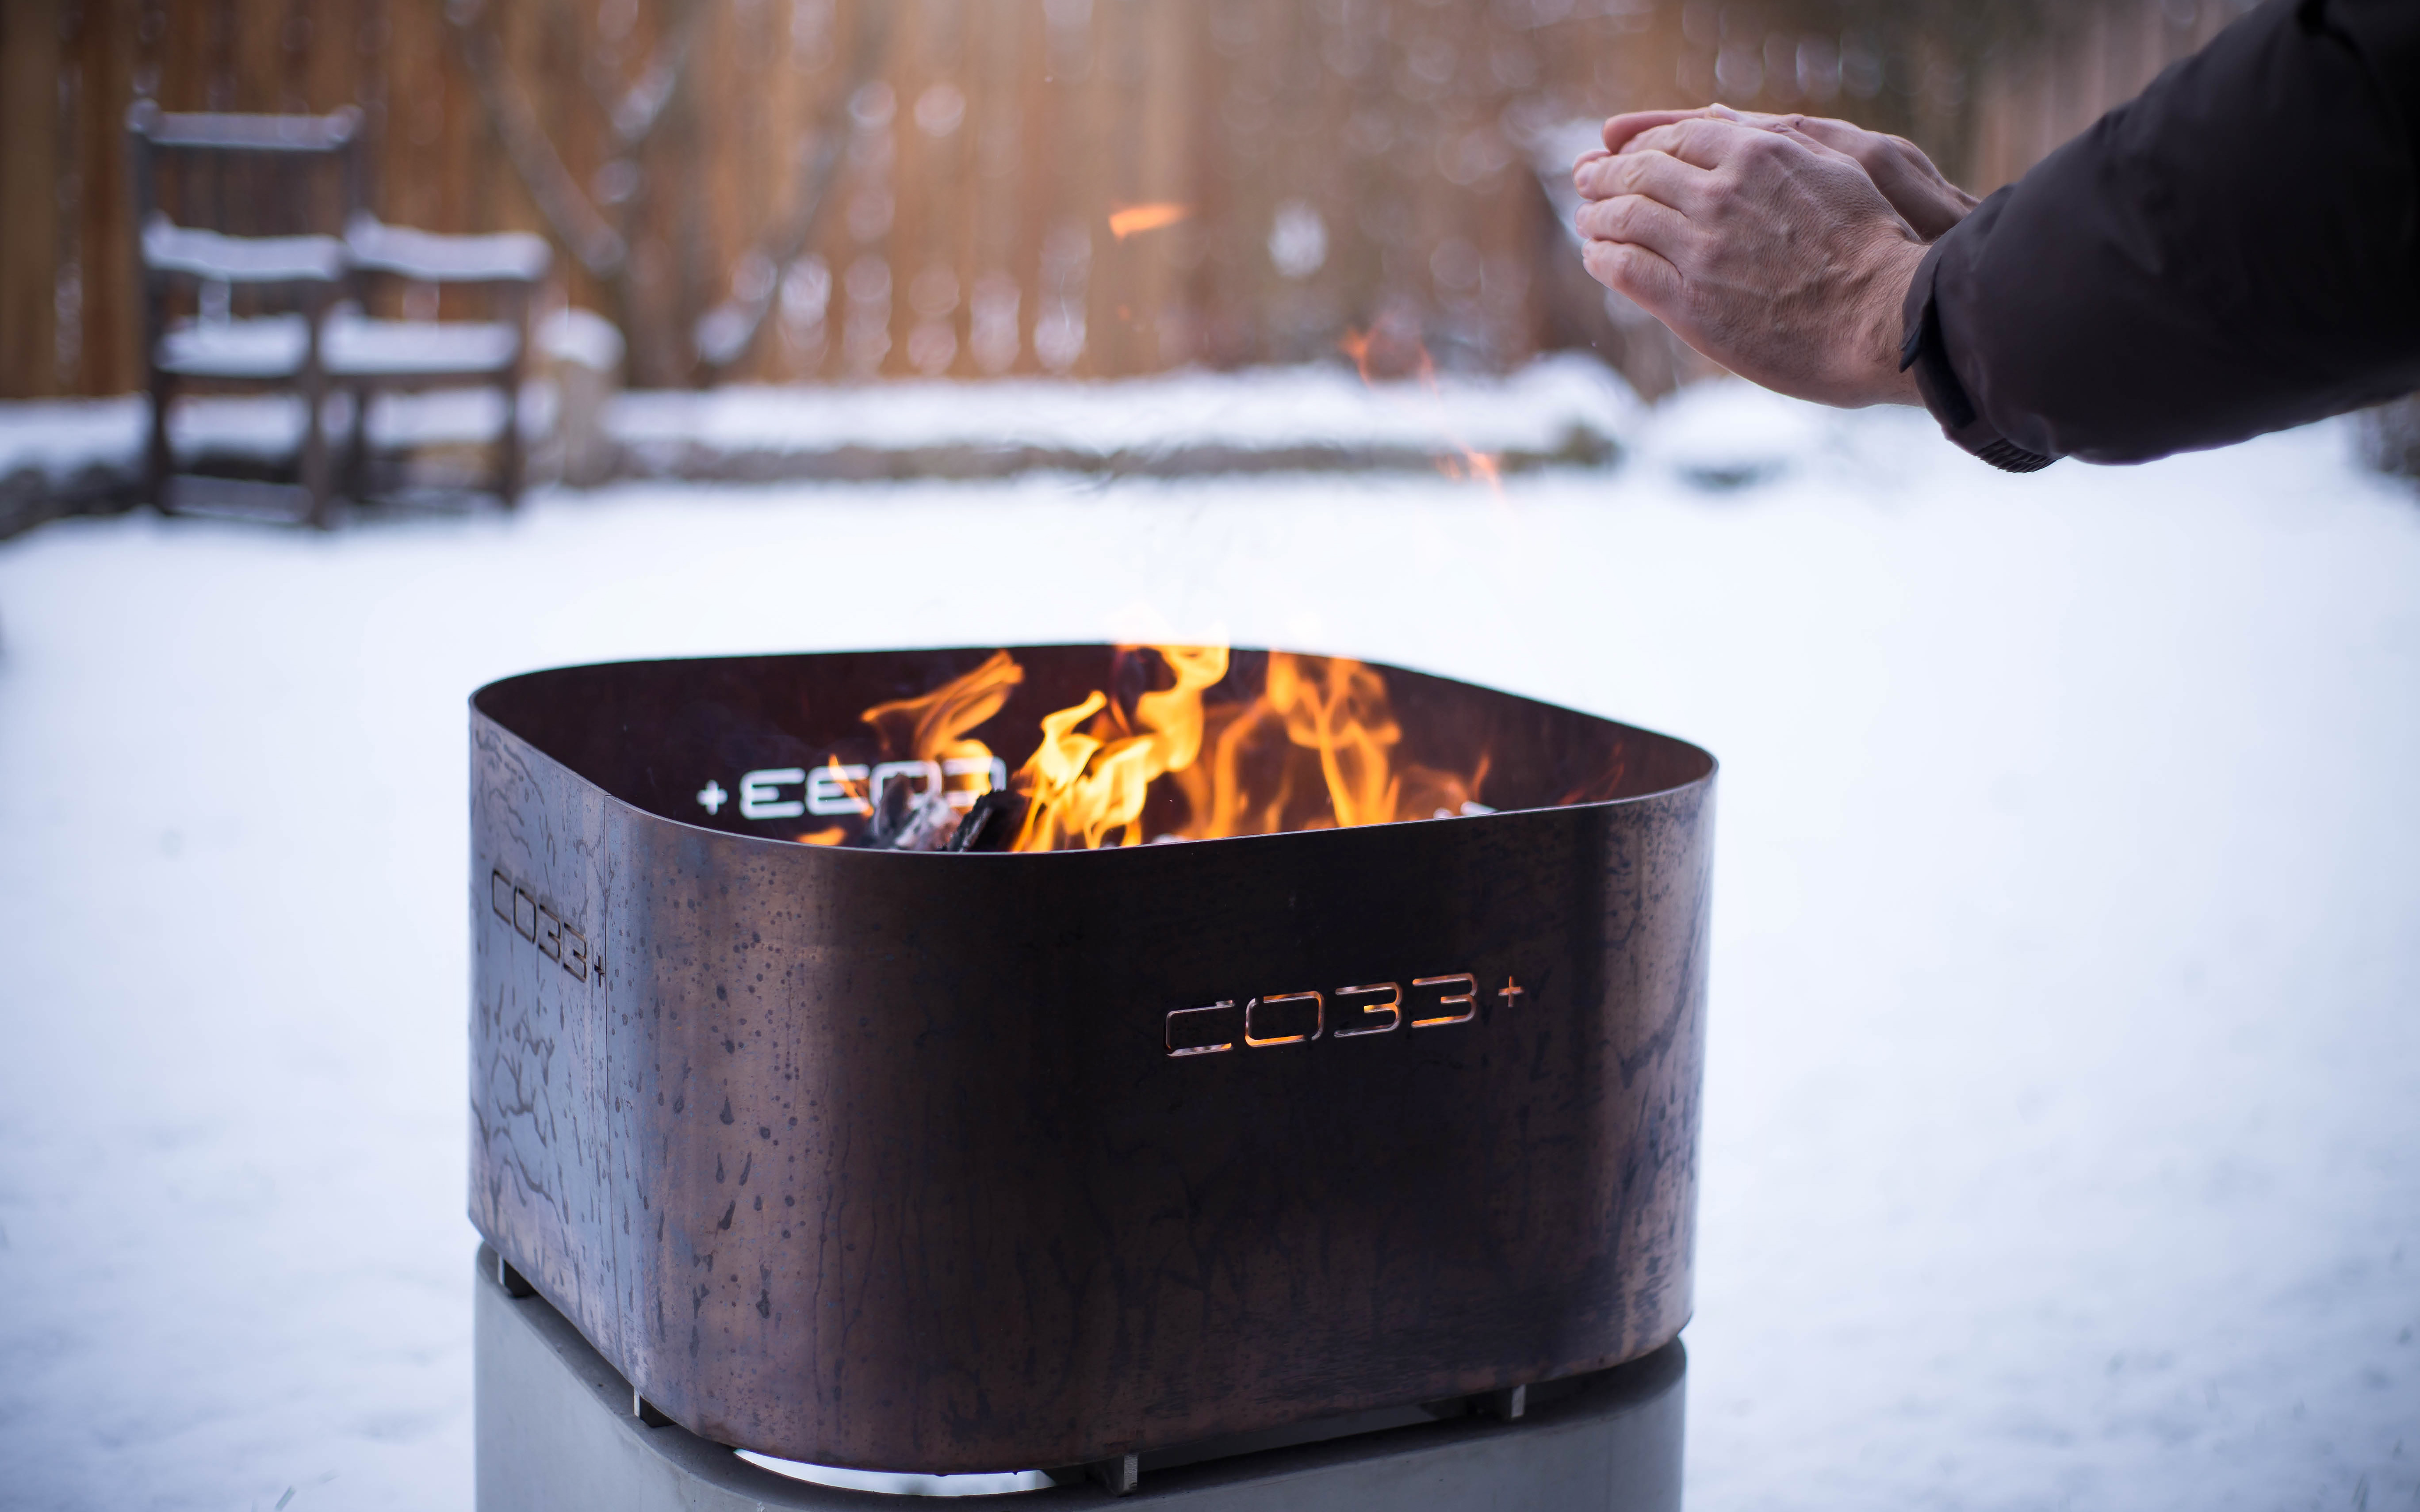 Firebowl made of concrete and stainless steel in use for warmth during winter